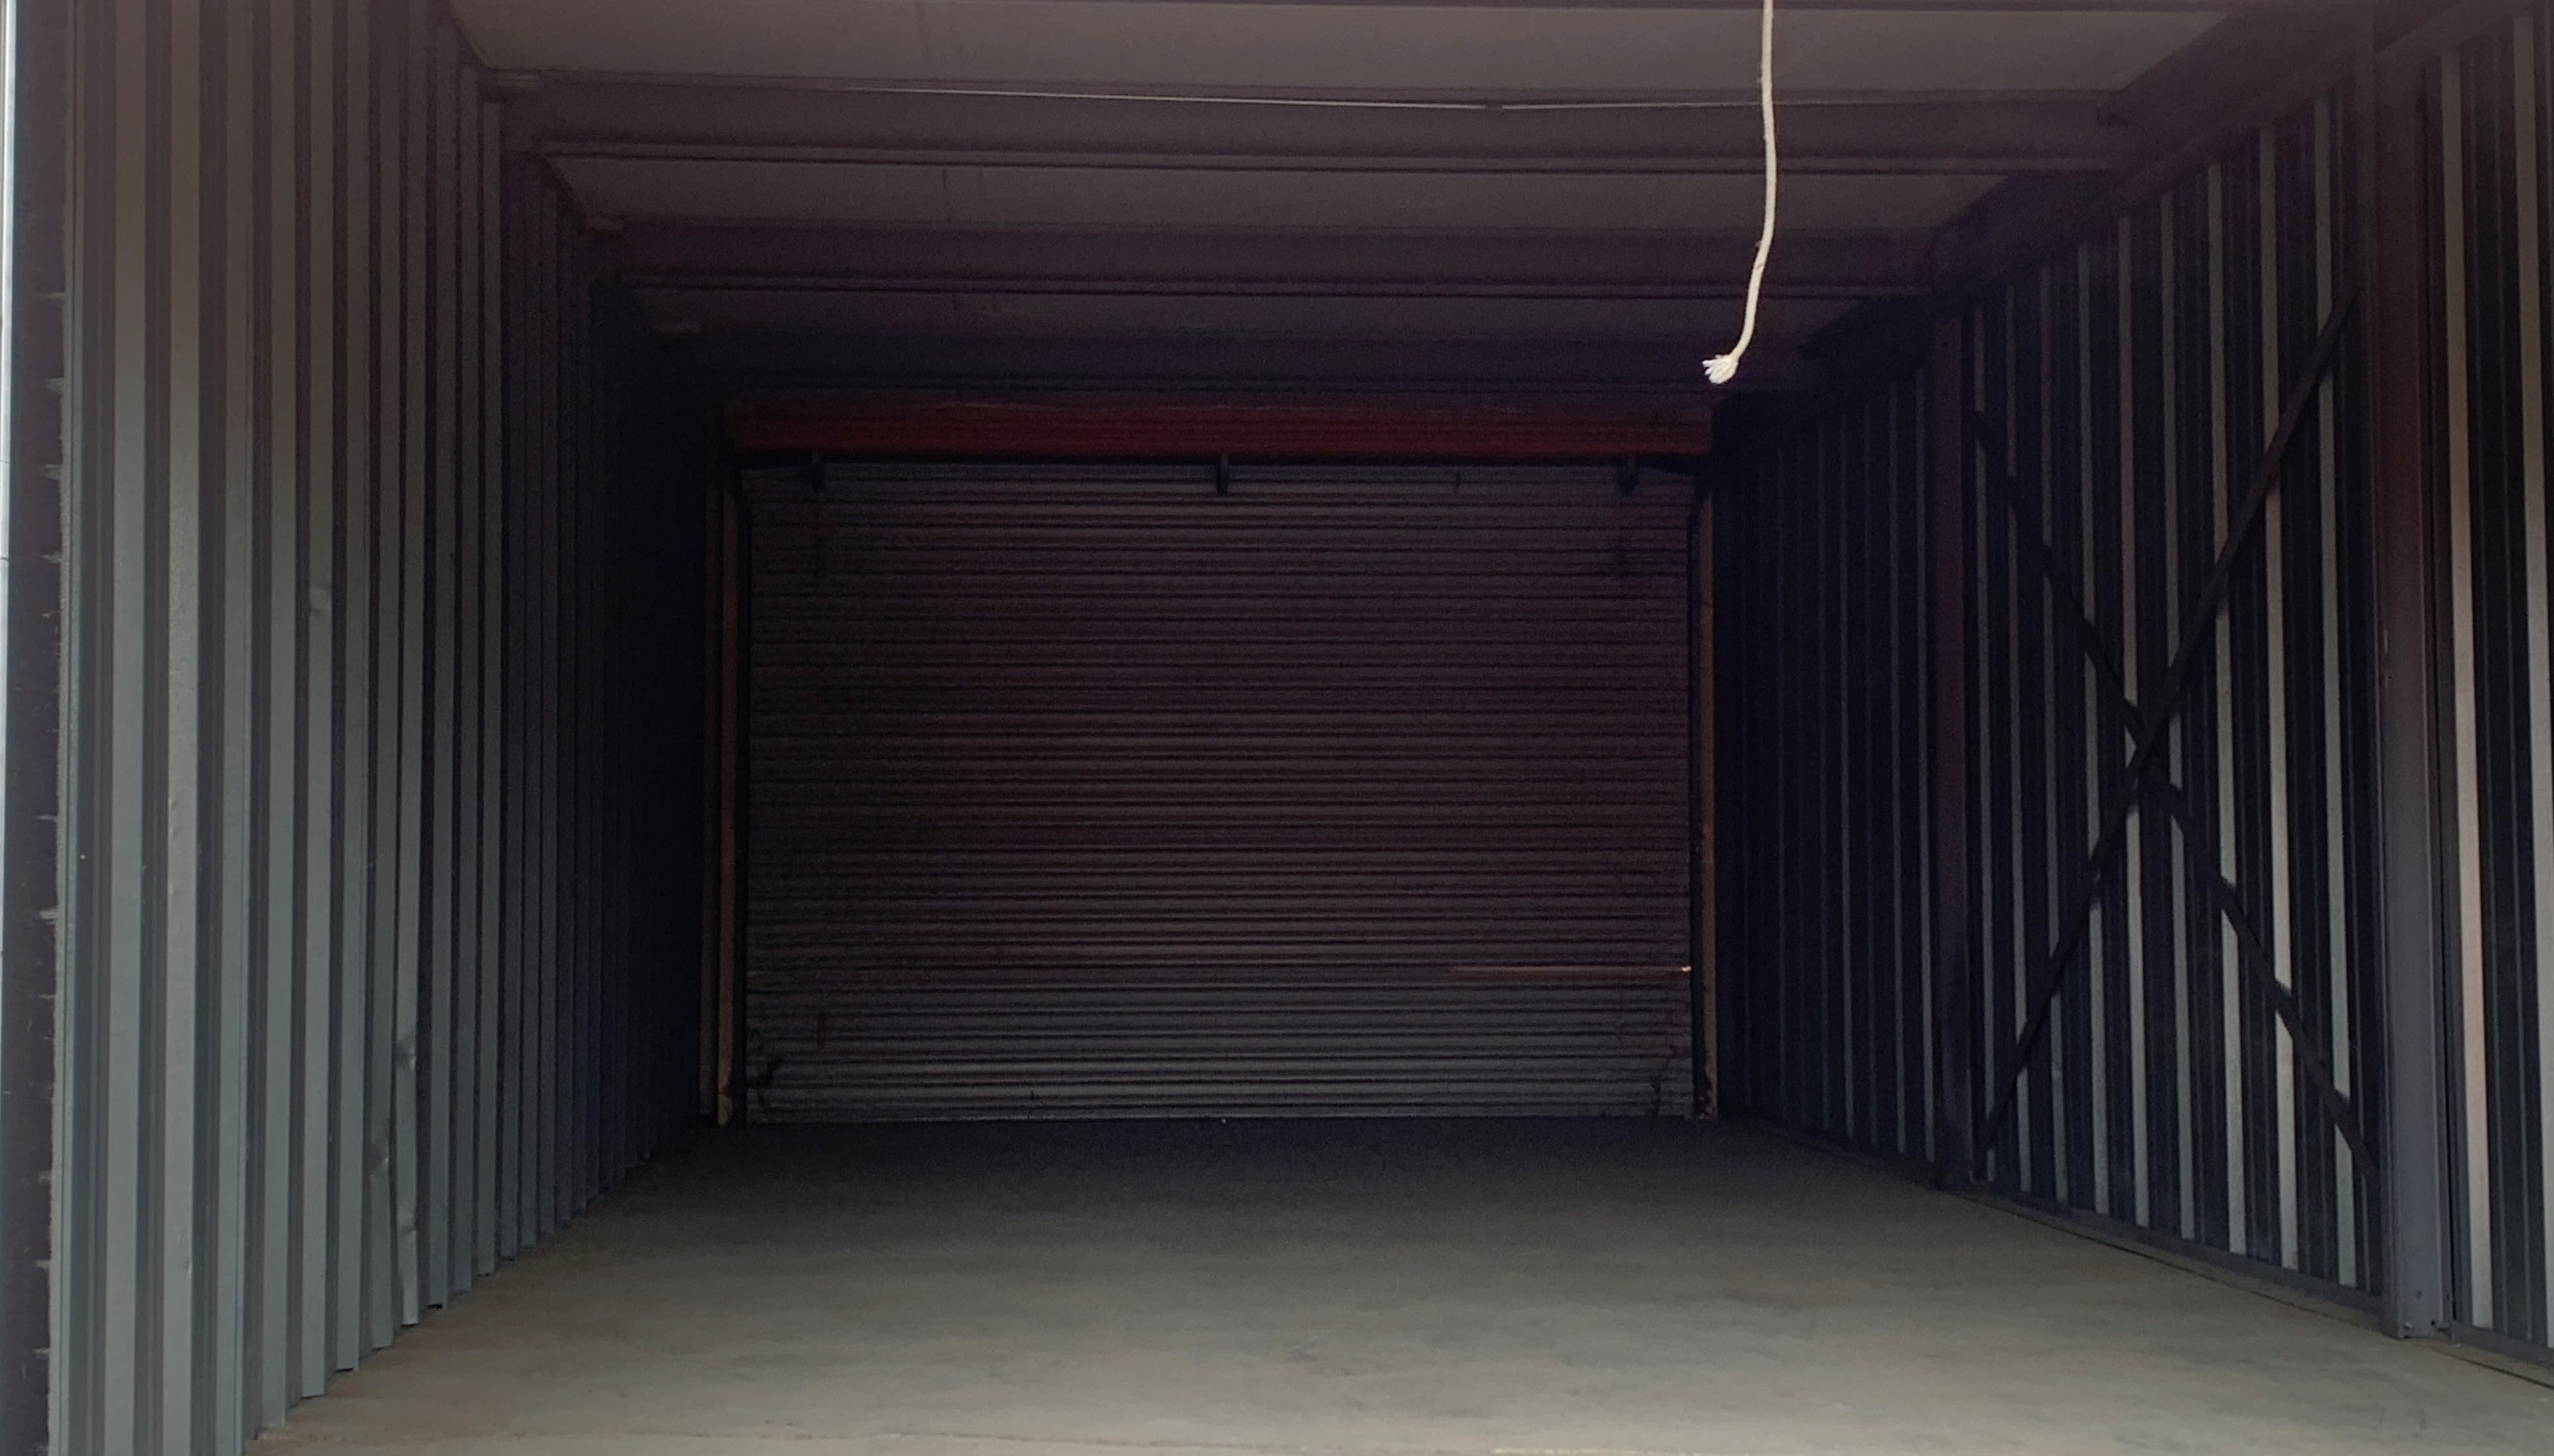 View our hours and directions at KO Storage in Minot, North Dakota